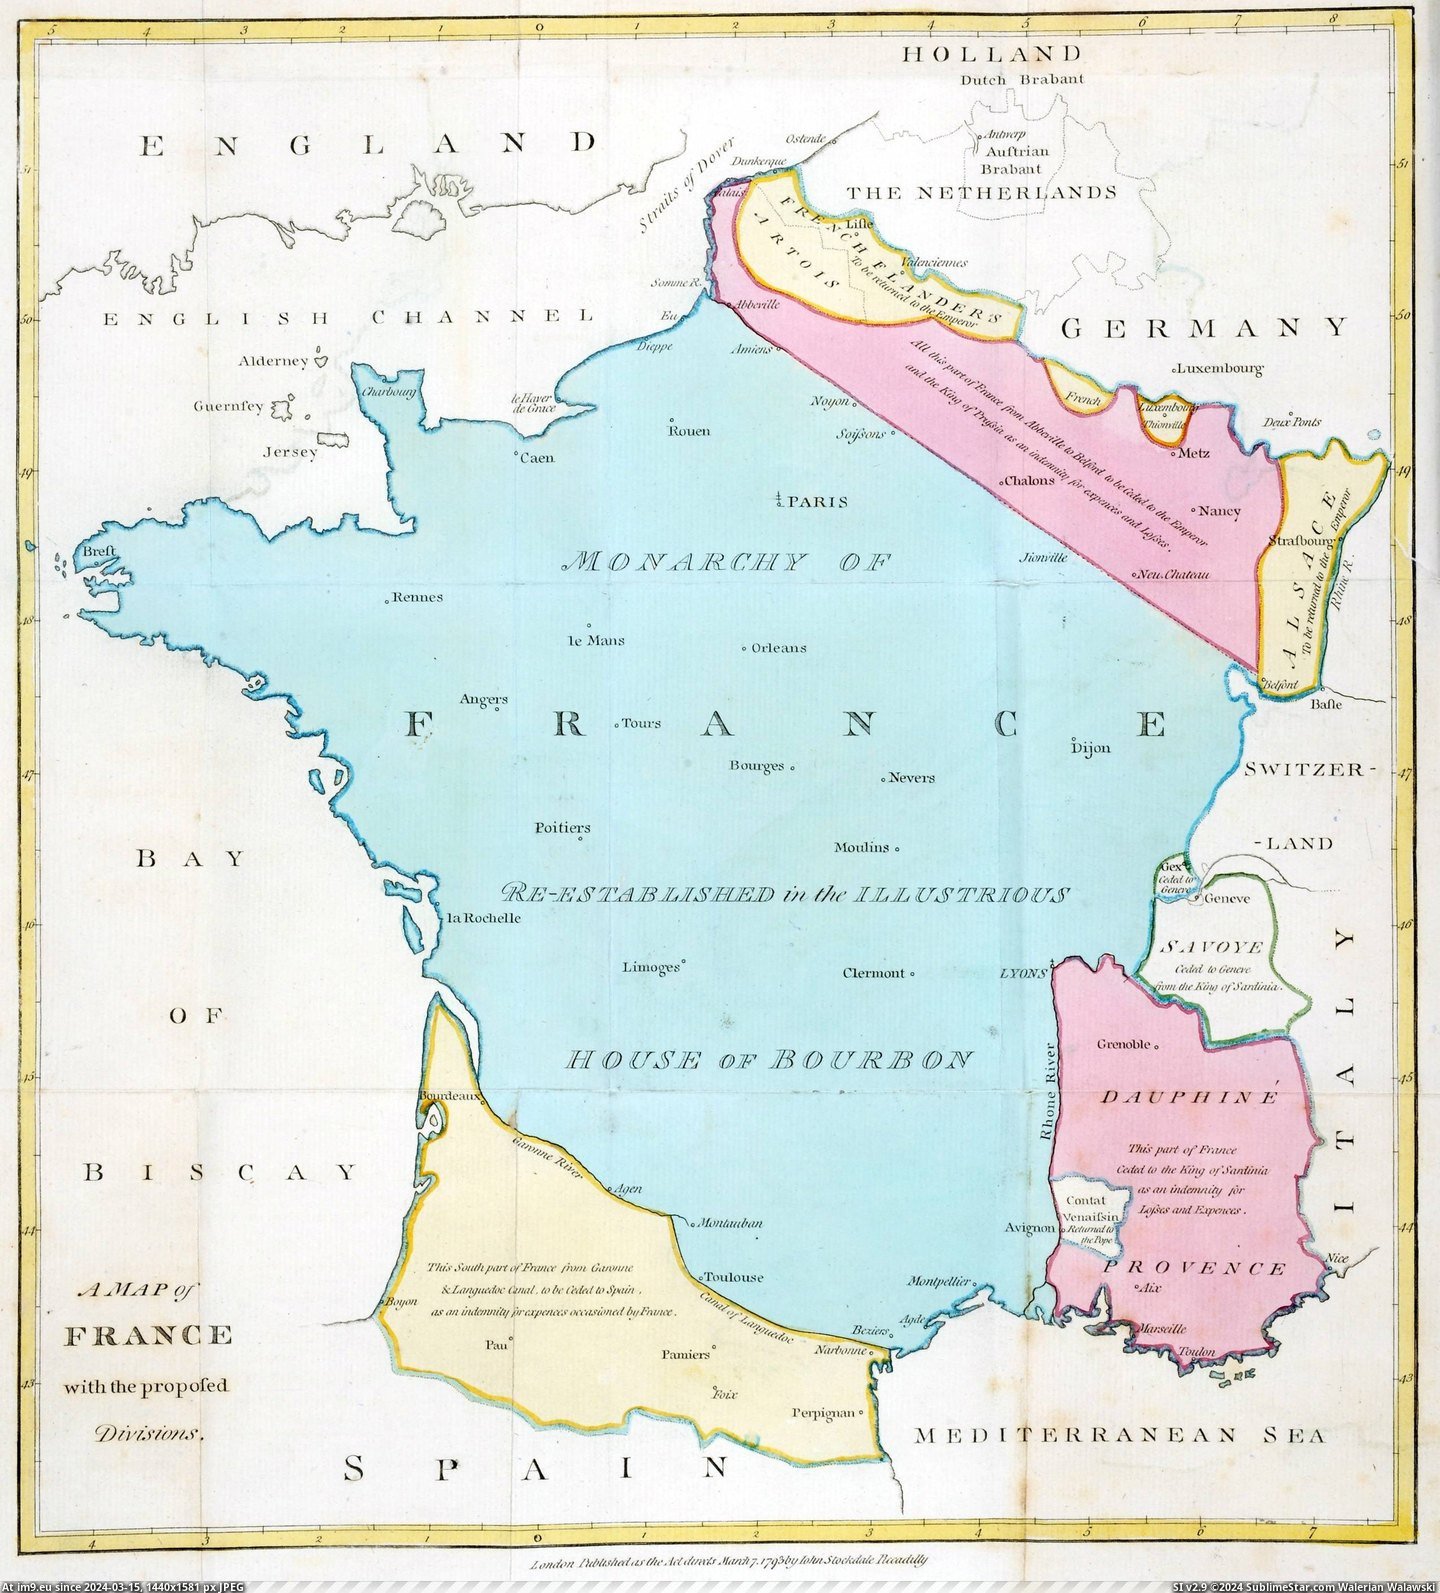 #France #Divisions #Proposed [Mapporn] Divisions of France Proposed by William Playfair in 1793 [2549x2811] Pic. (Image of album My r/MAPS favs))